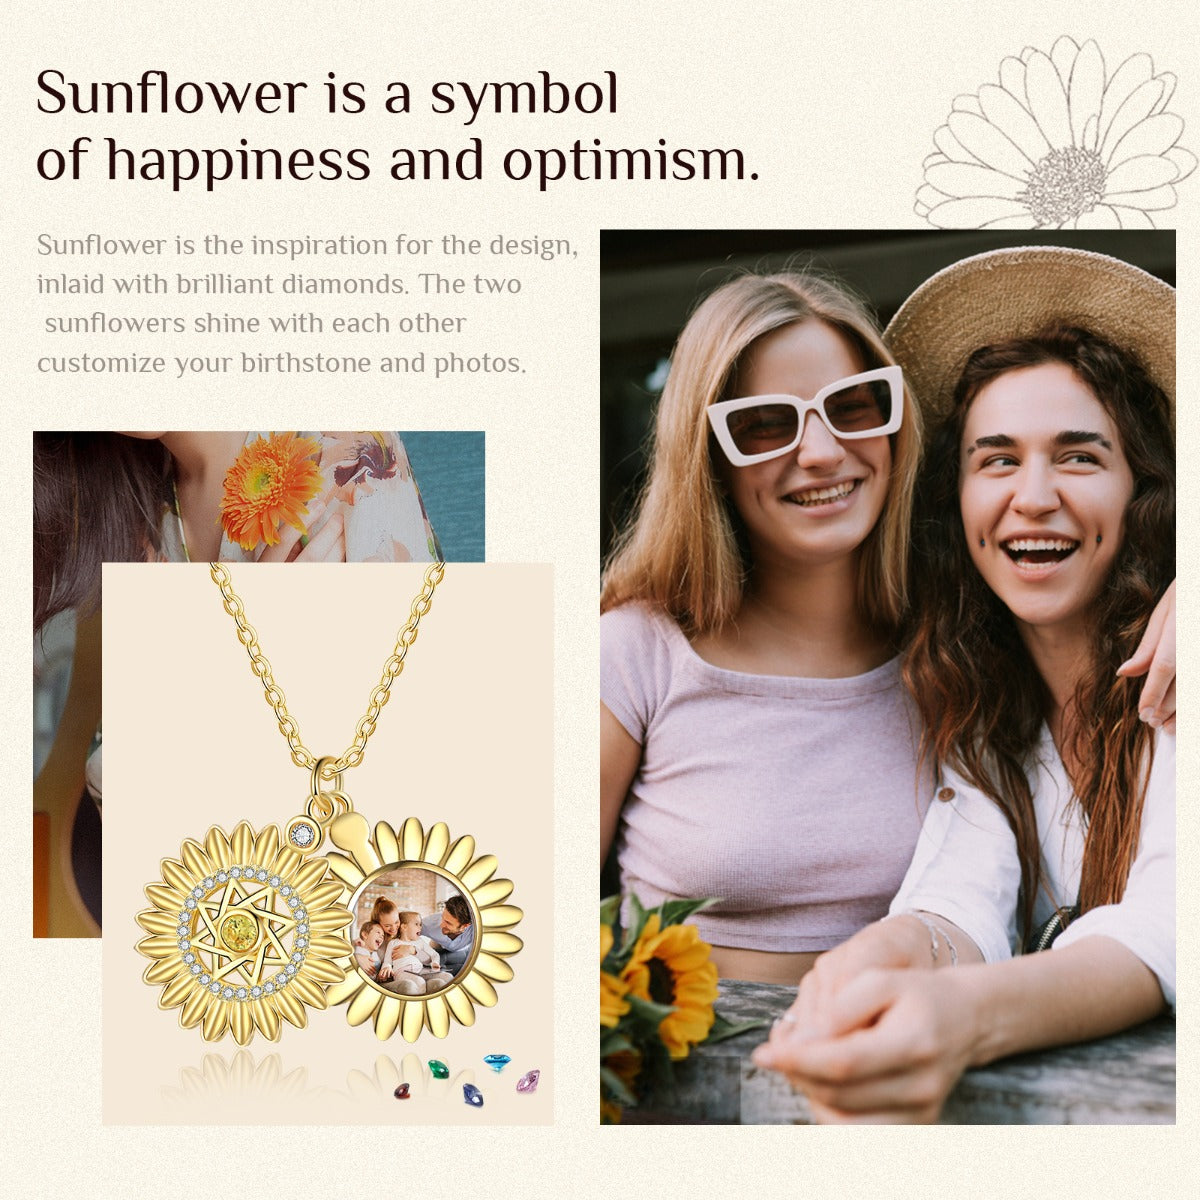 Personalized Rhodium Plated Gold Plated Sunflower Photo Necklace